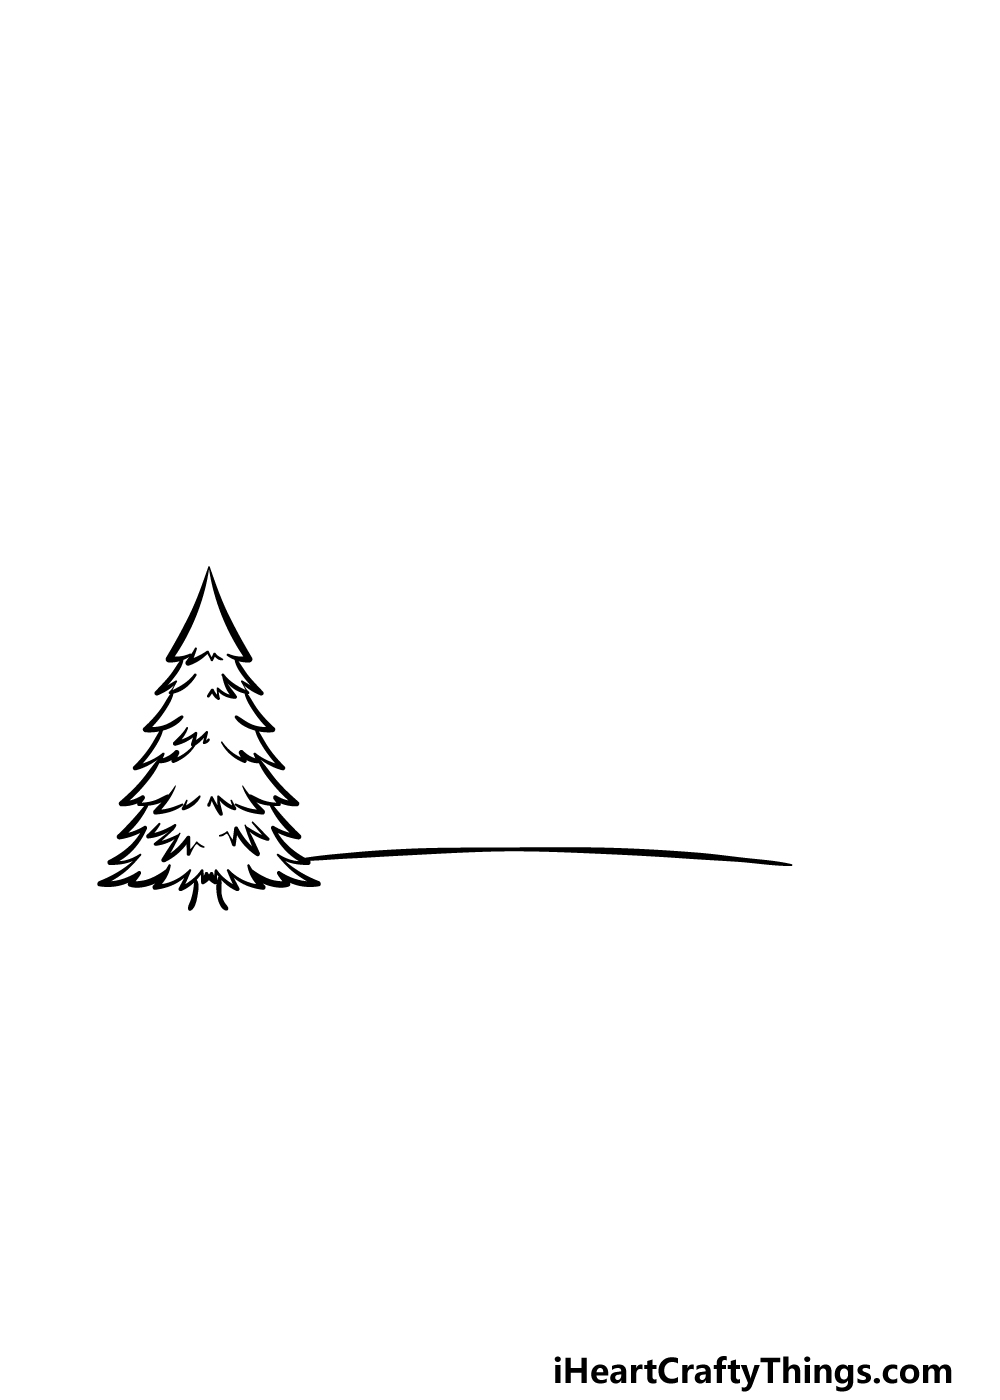 how to draw a Hill step 1